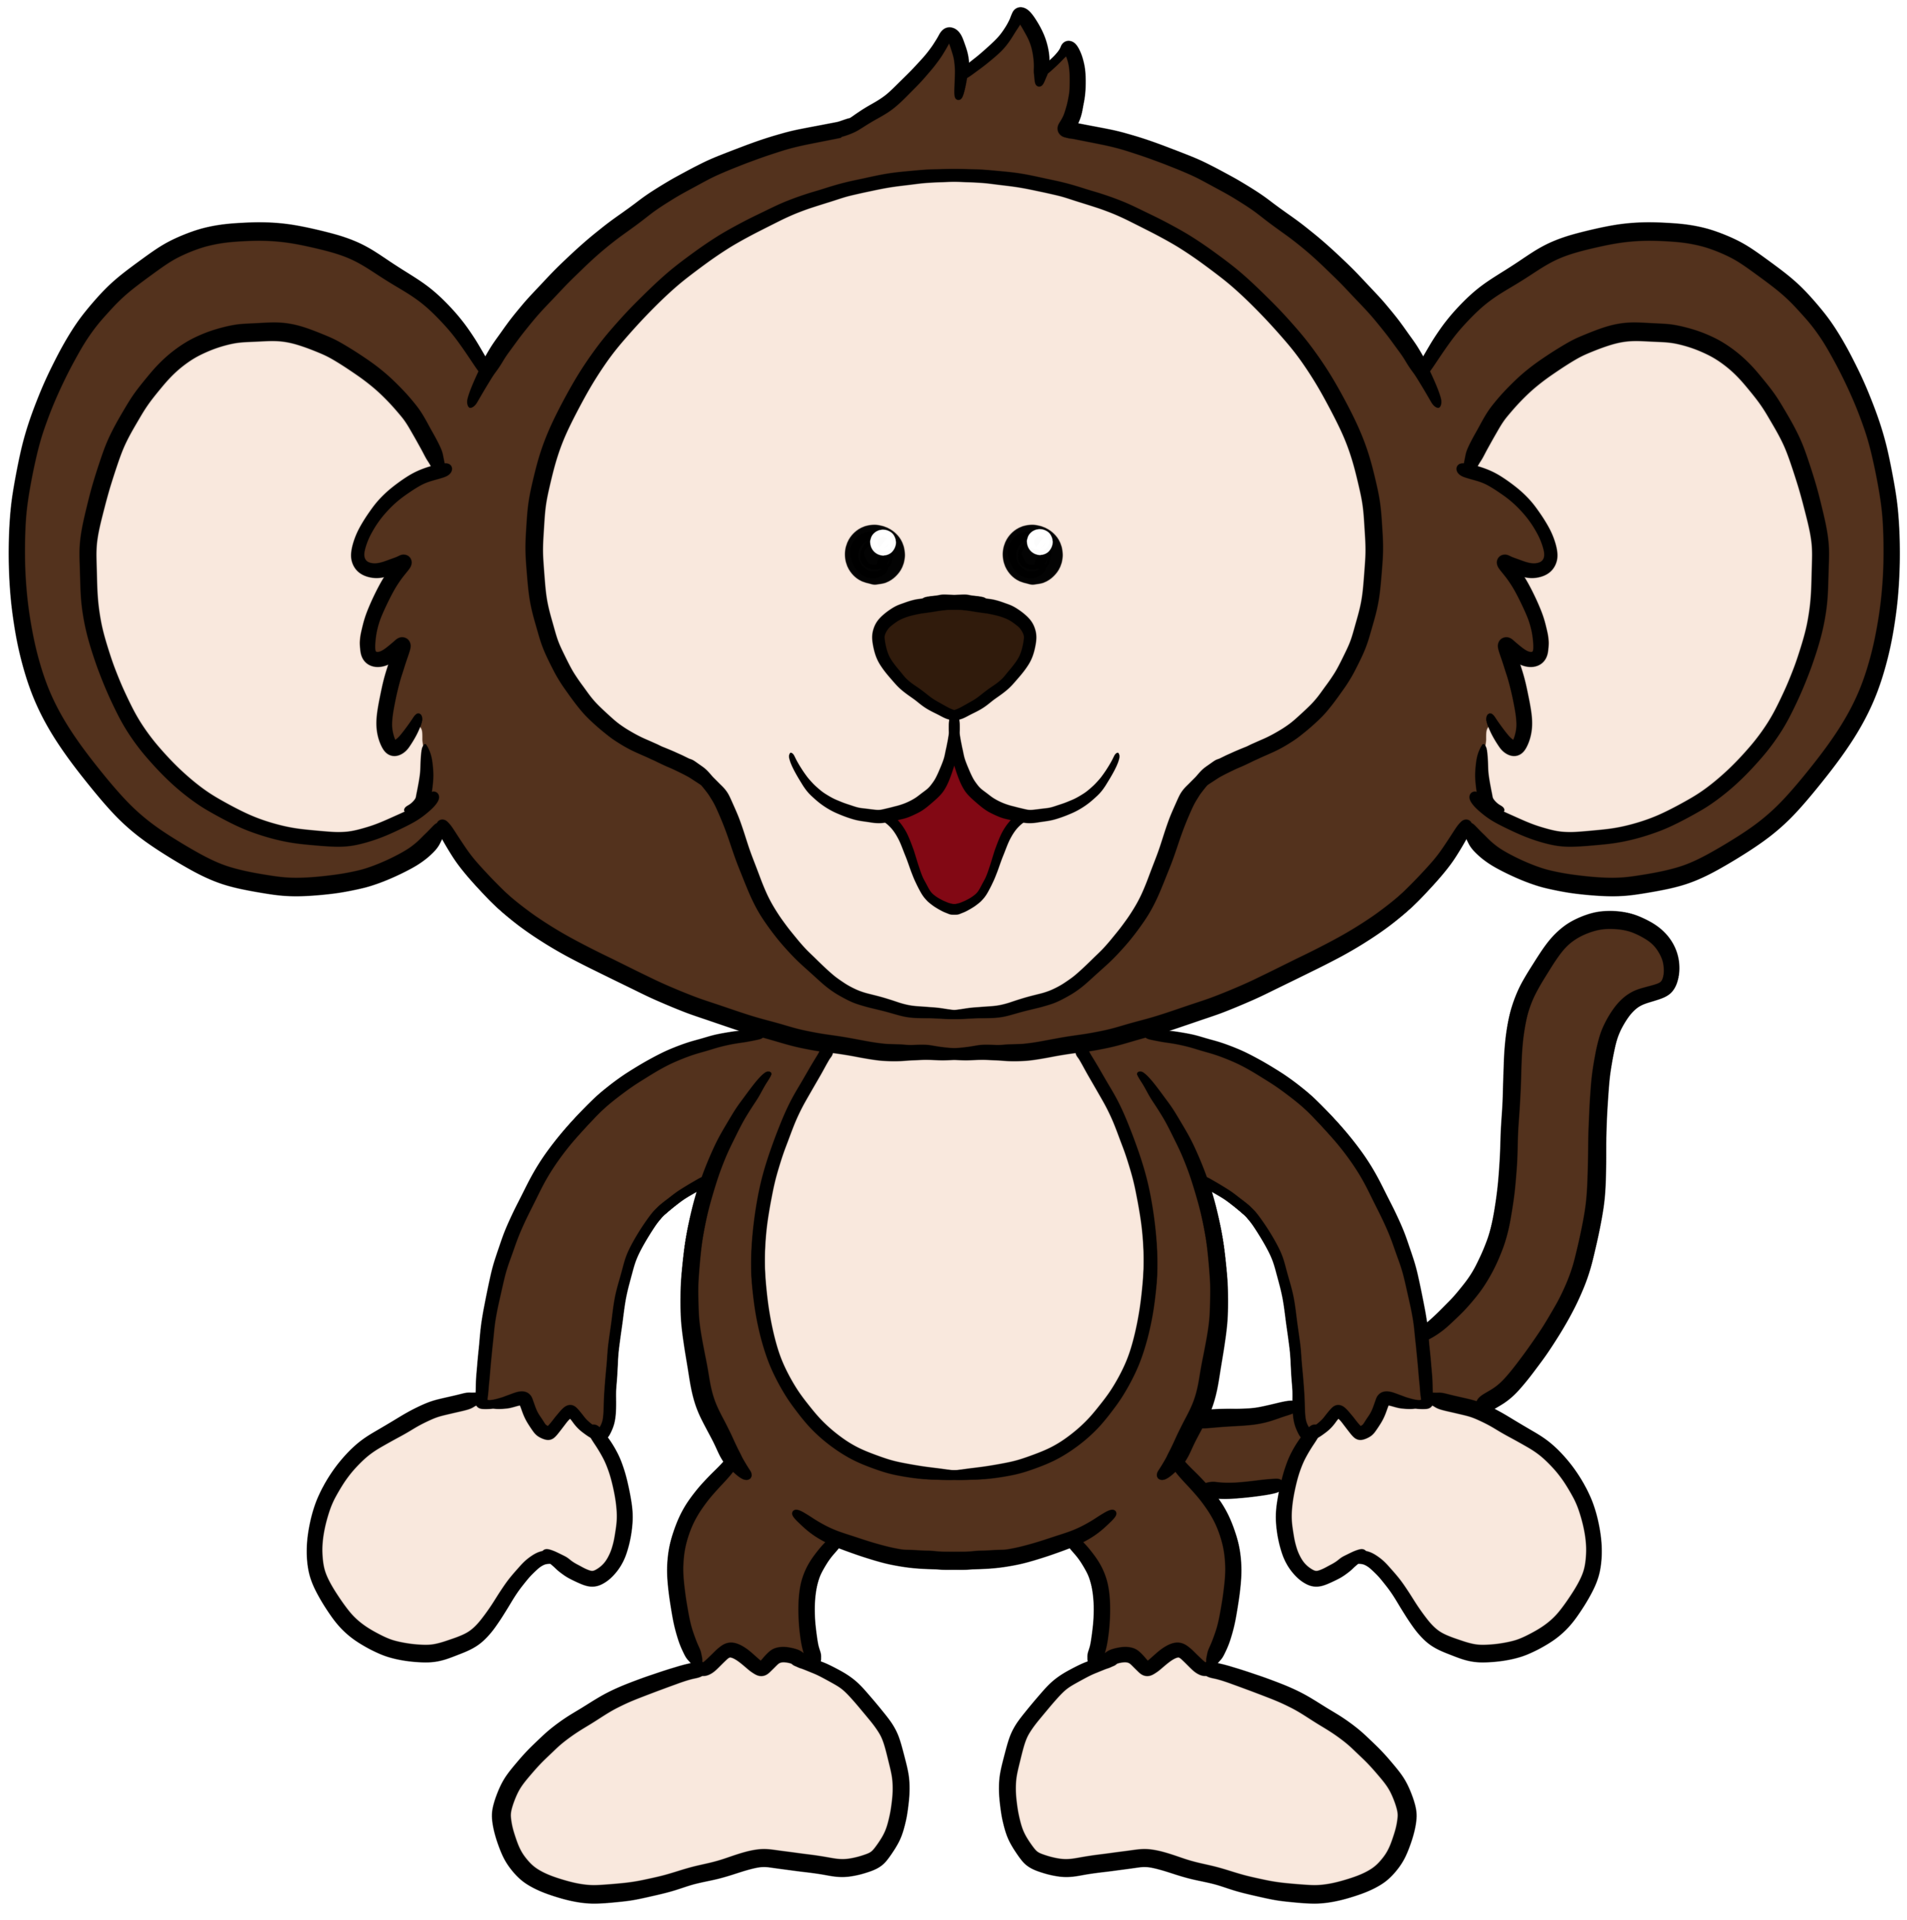 Monkey PNG Free Images with Transparent Background - (423 Free Downloads)